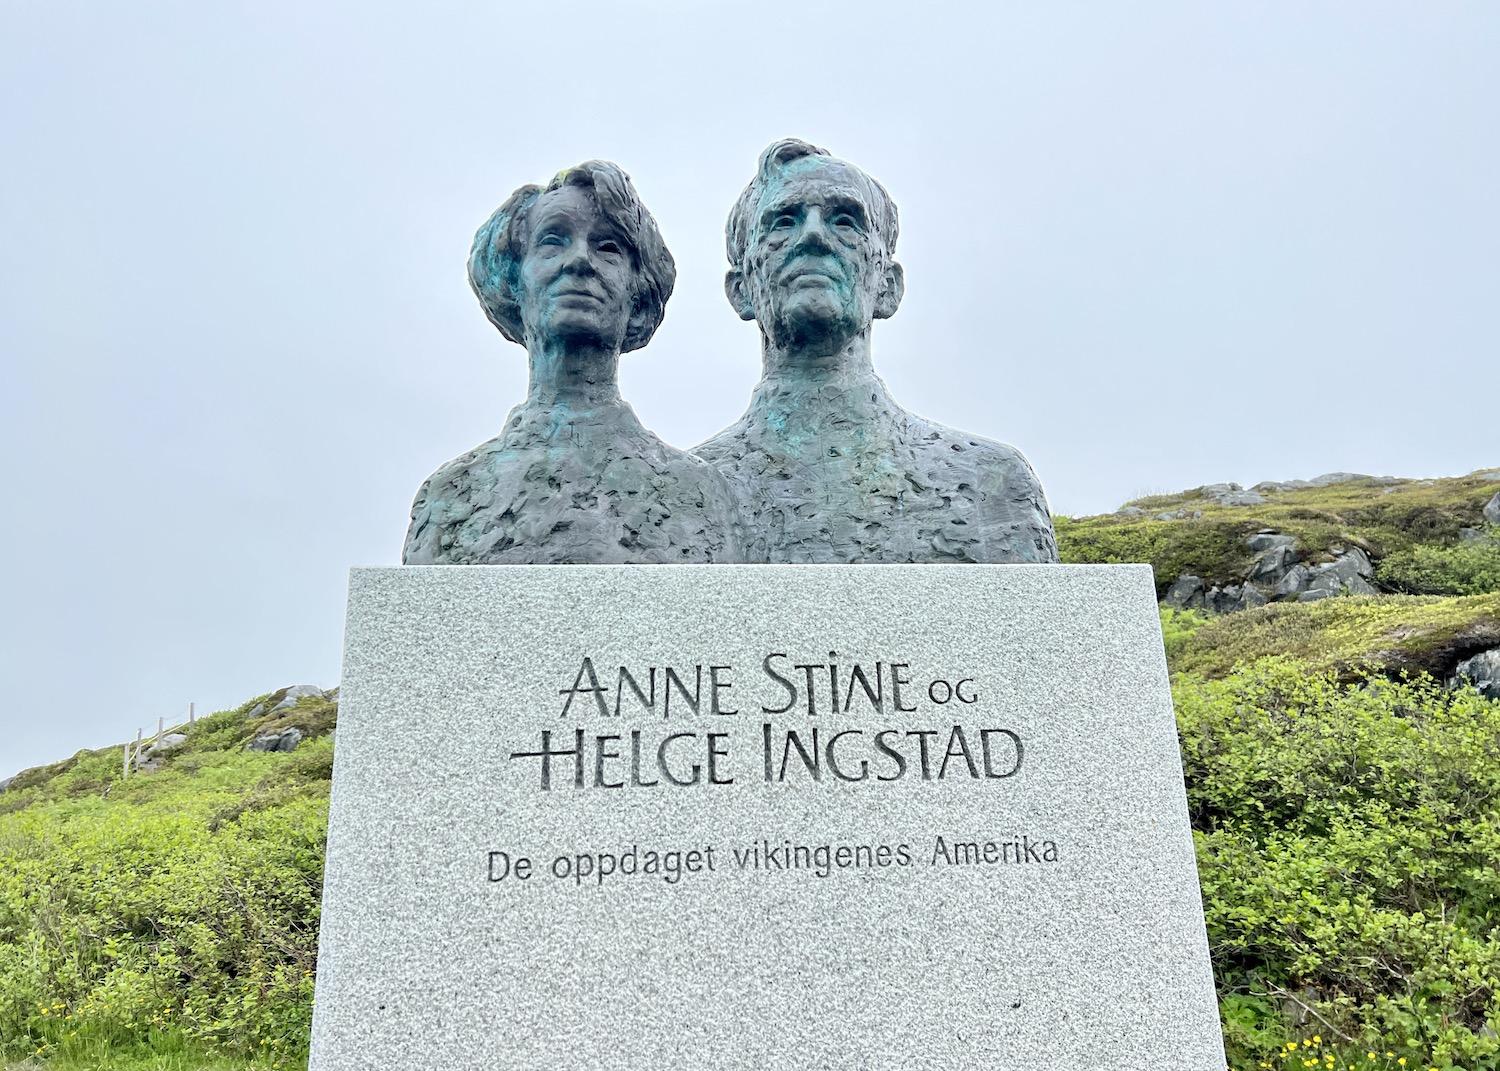 Anne Stine and Helge Ingstad are honored at L'Anse aux Meadows for proving the Norse first landed here when they came to North America.